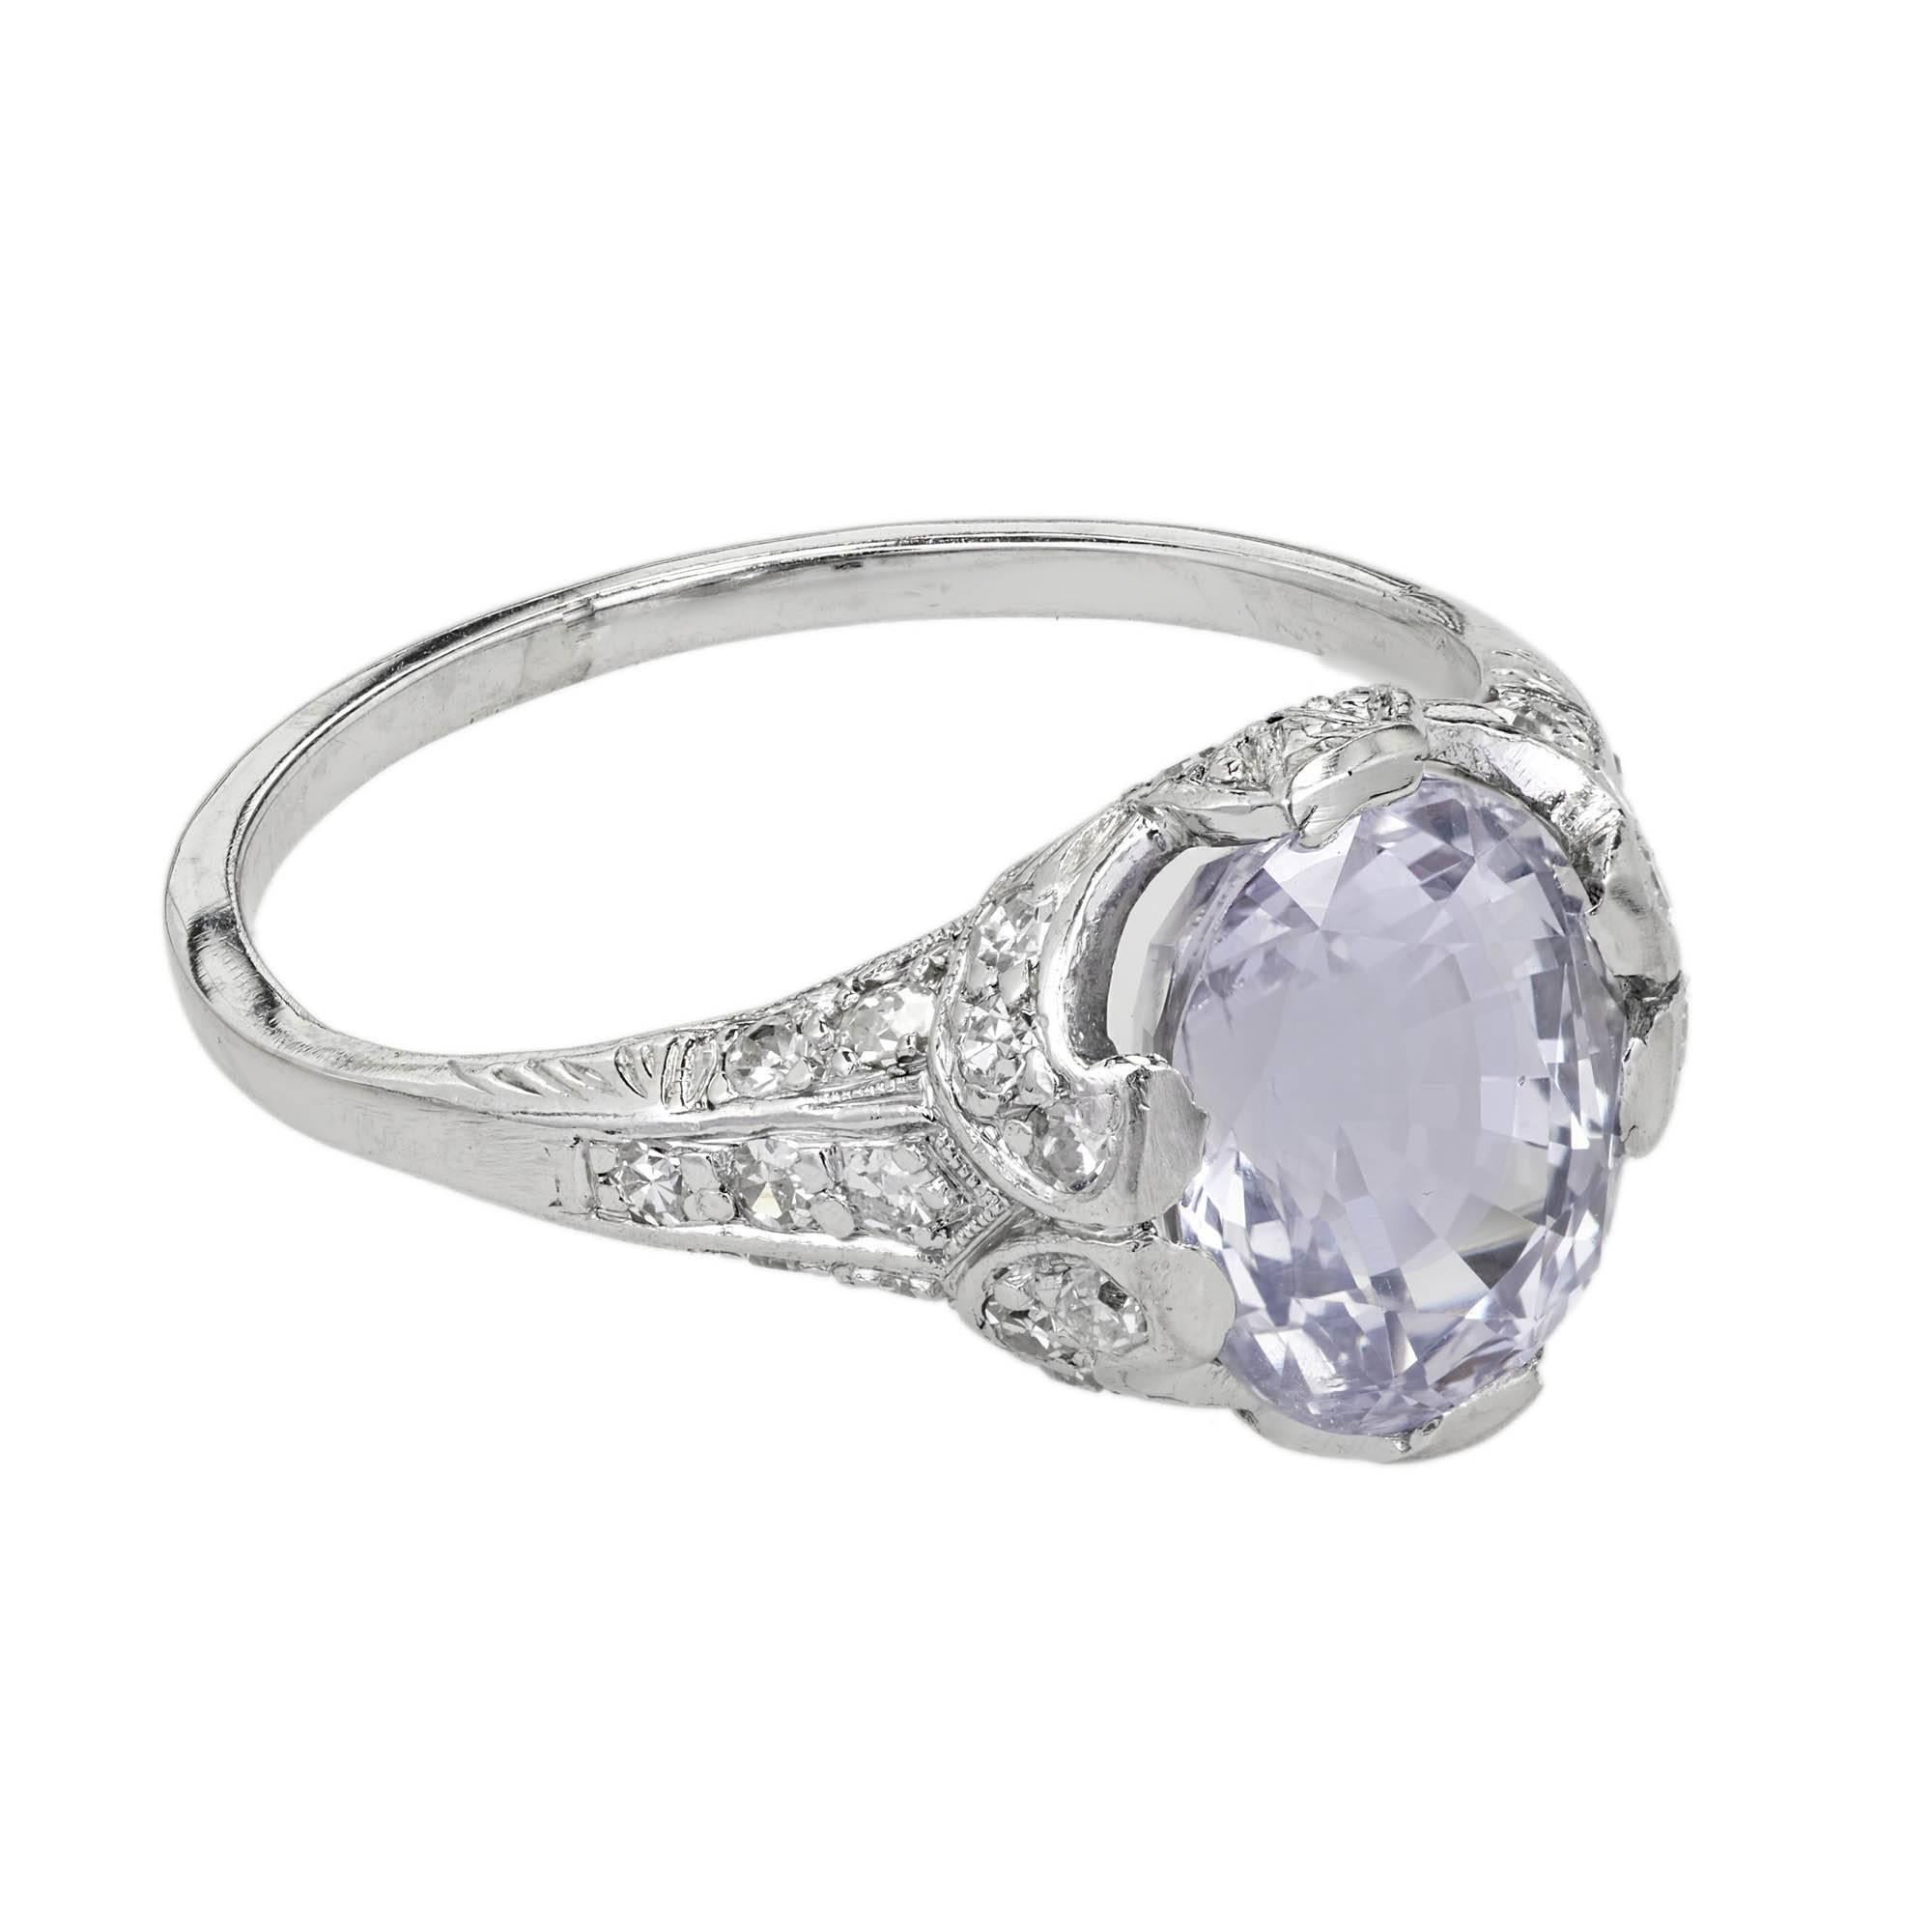 Circa 1910s GIA certified natural very light gray violet oval Sapphire in its original handmade Platinum setting with accent diamonds. 

1 modified oval very light grayish violet Sapphires, approx. total weight 3.45cts, VS2 – SI1, natural no heat